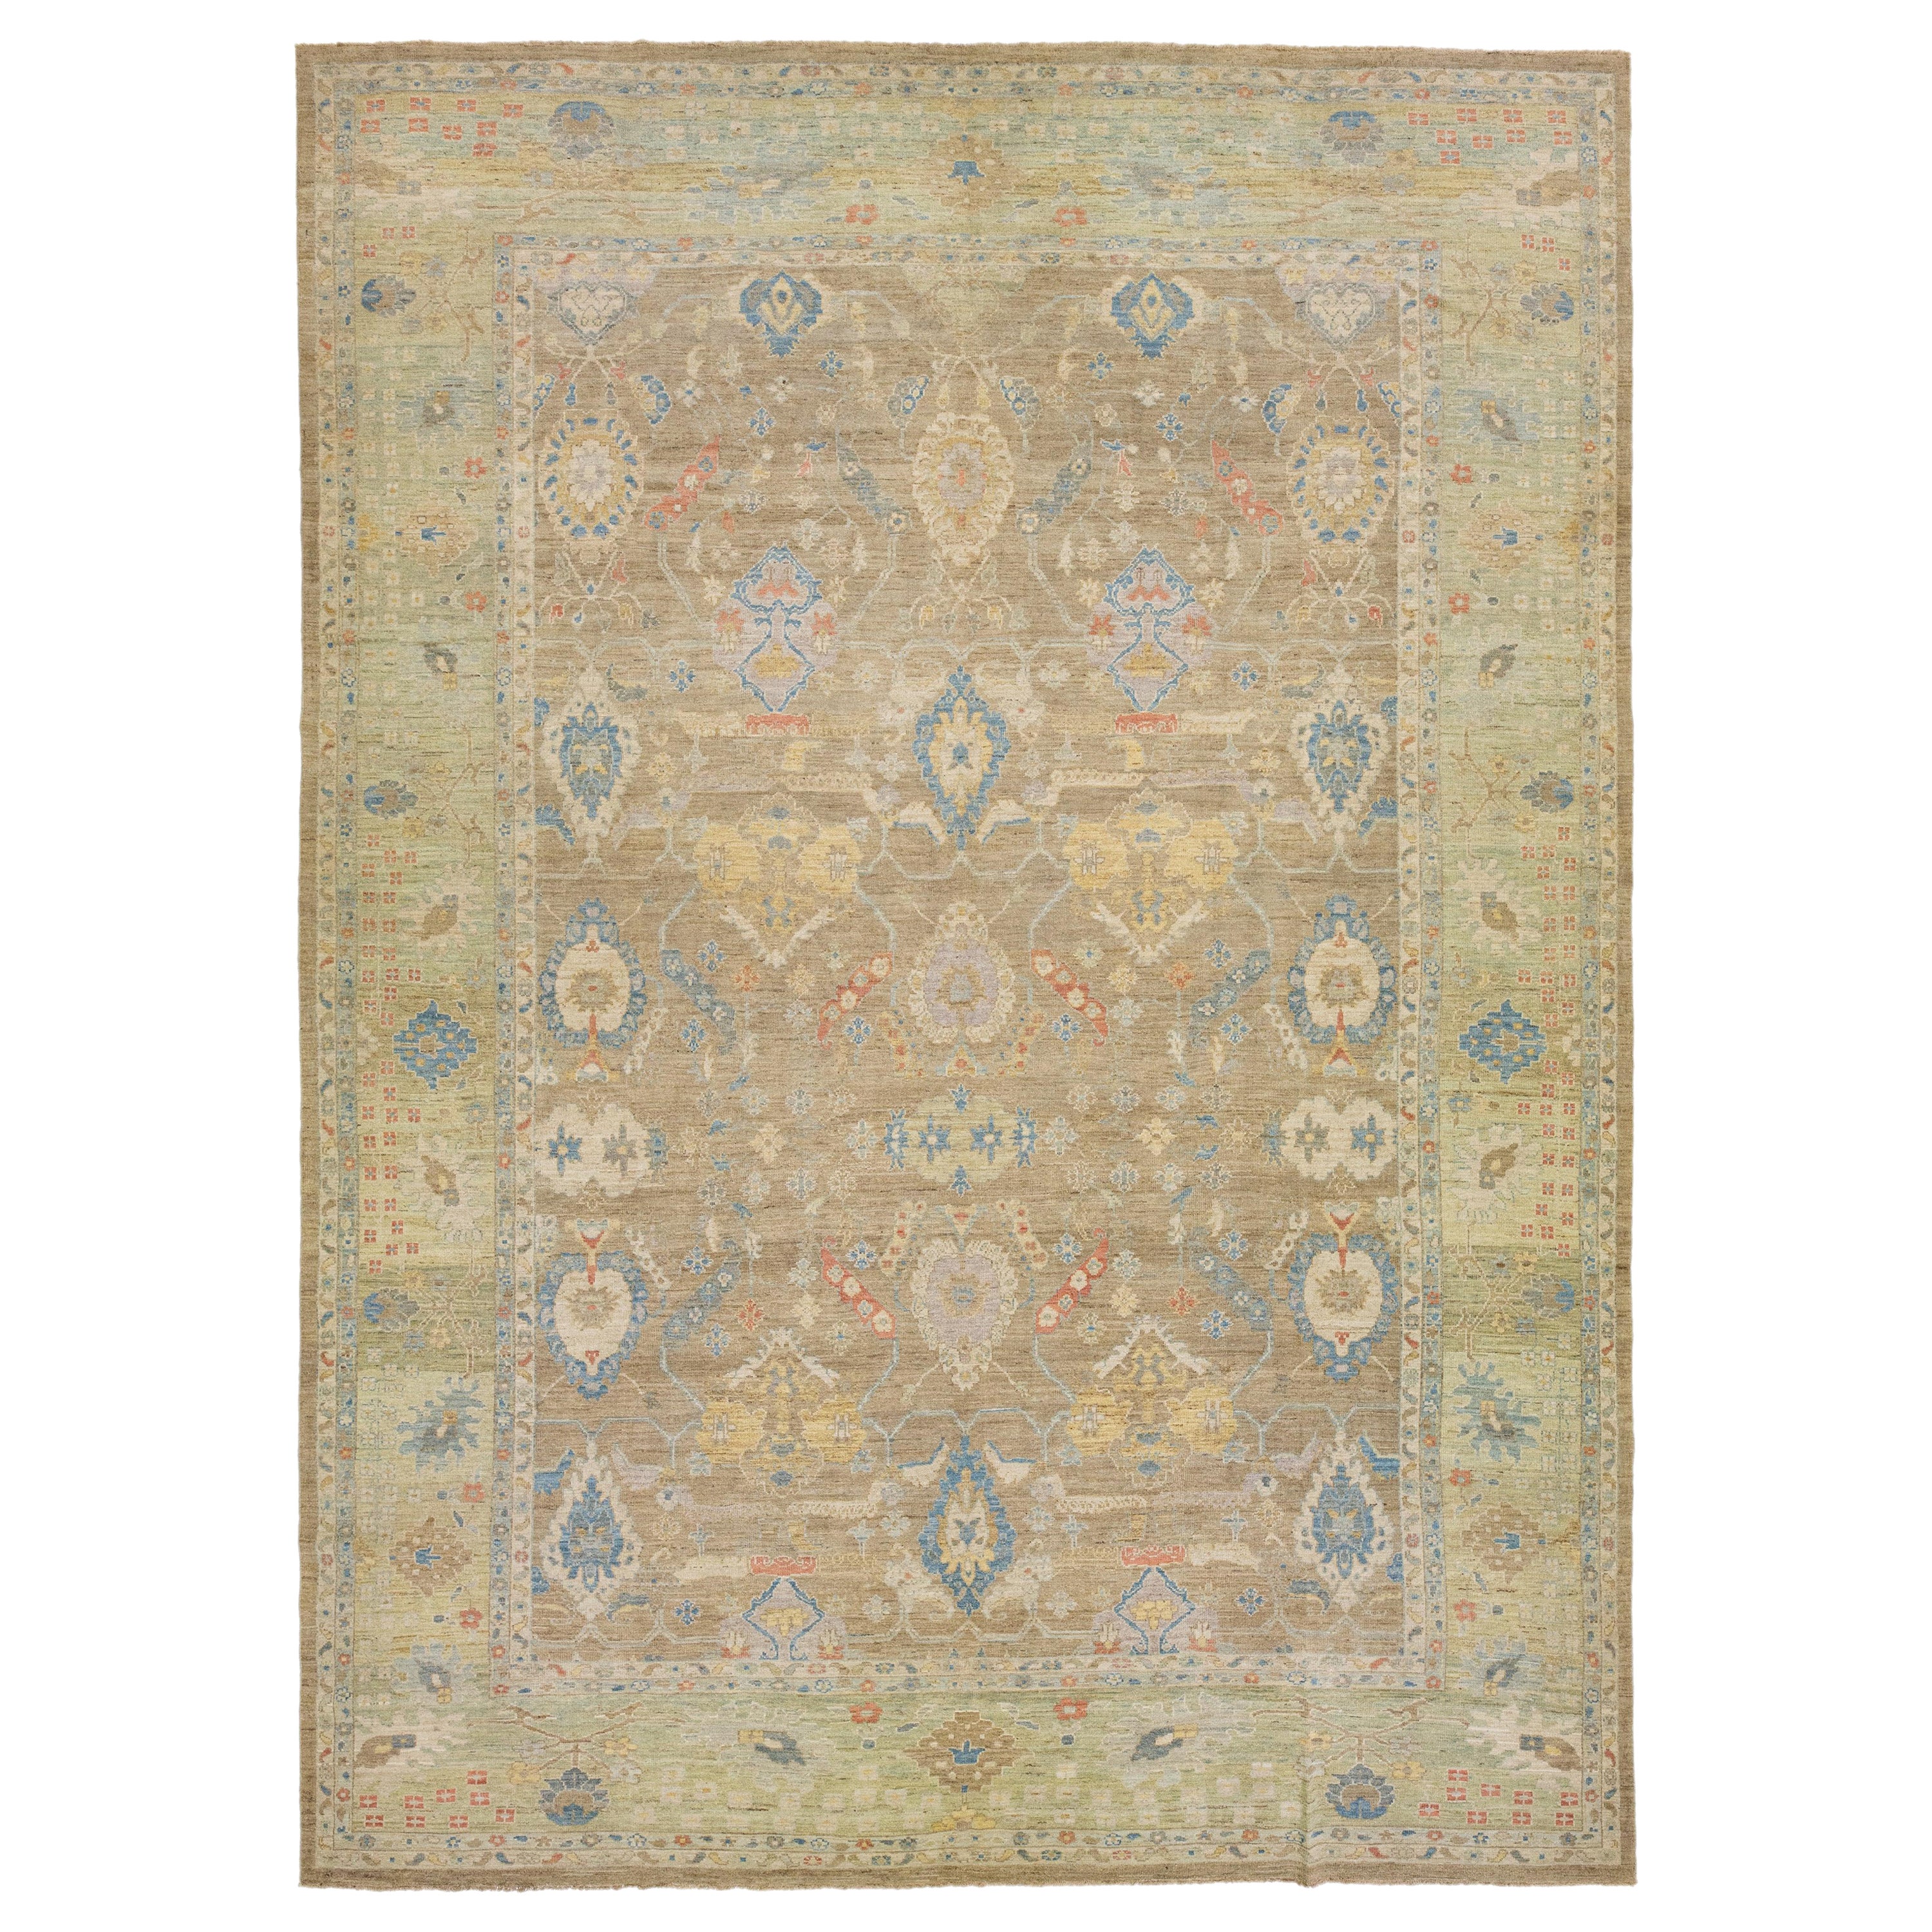 Oversize Modern Floral Sultanabad Wool Rug with Brown Field